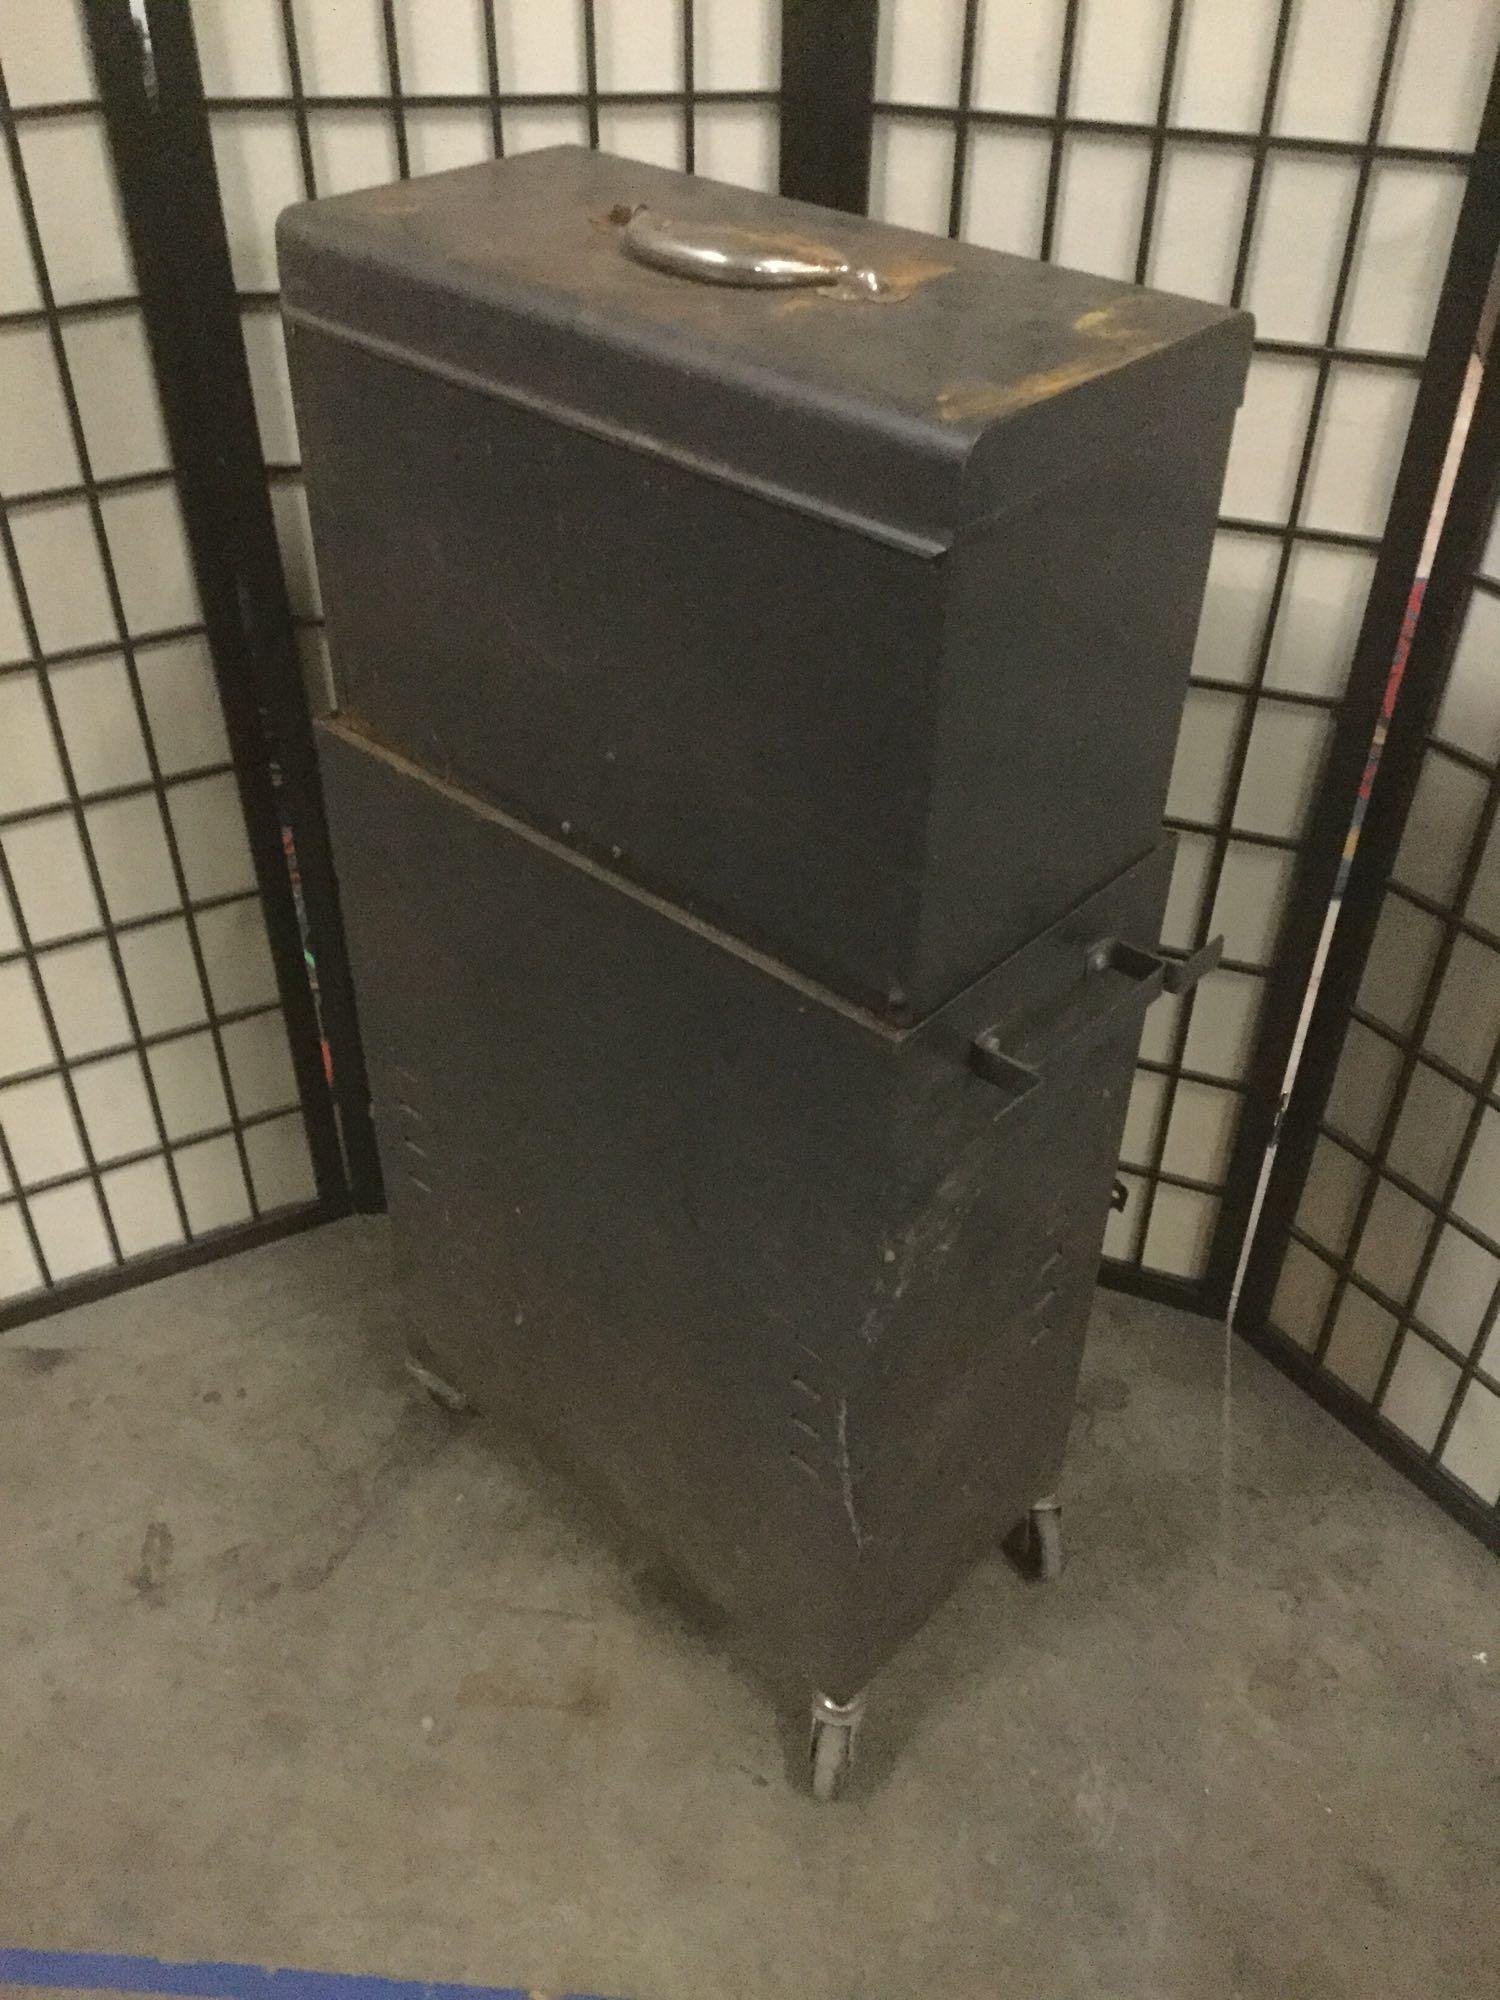 Metal three drawer tool cabinet w/casters, approx. 22x14x41 inches.